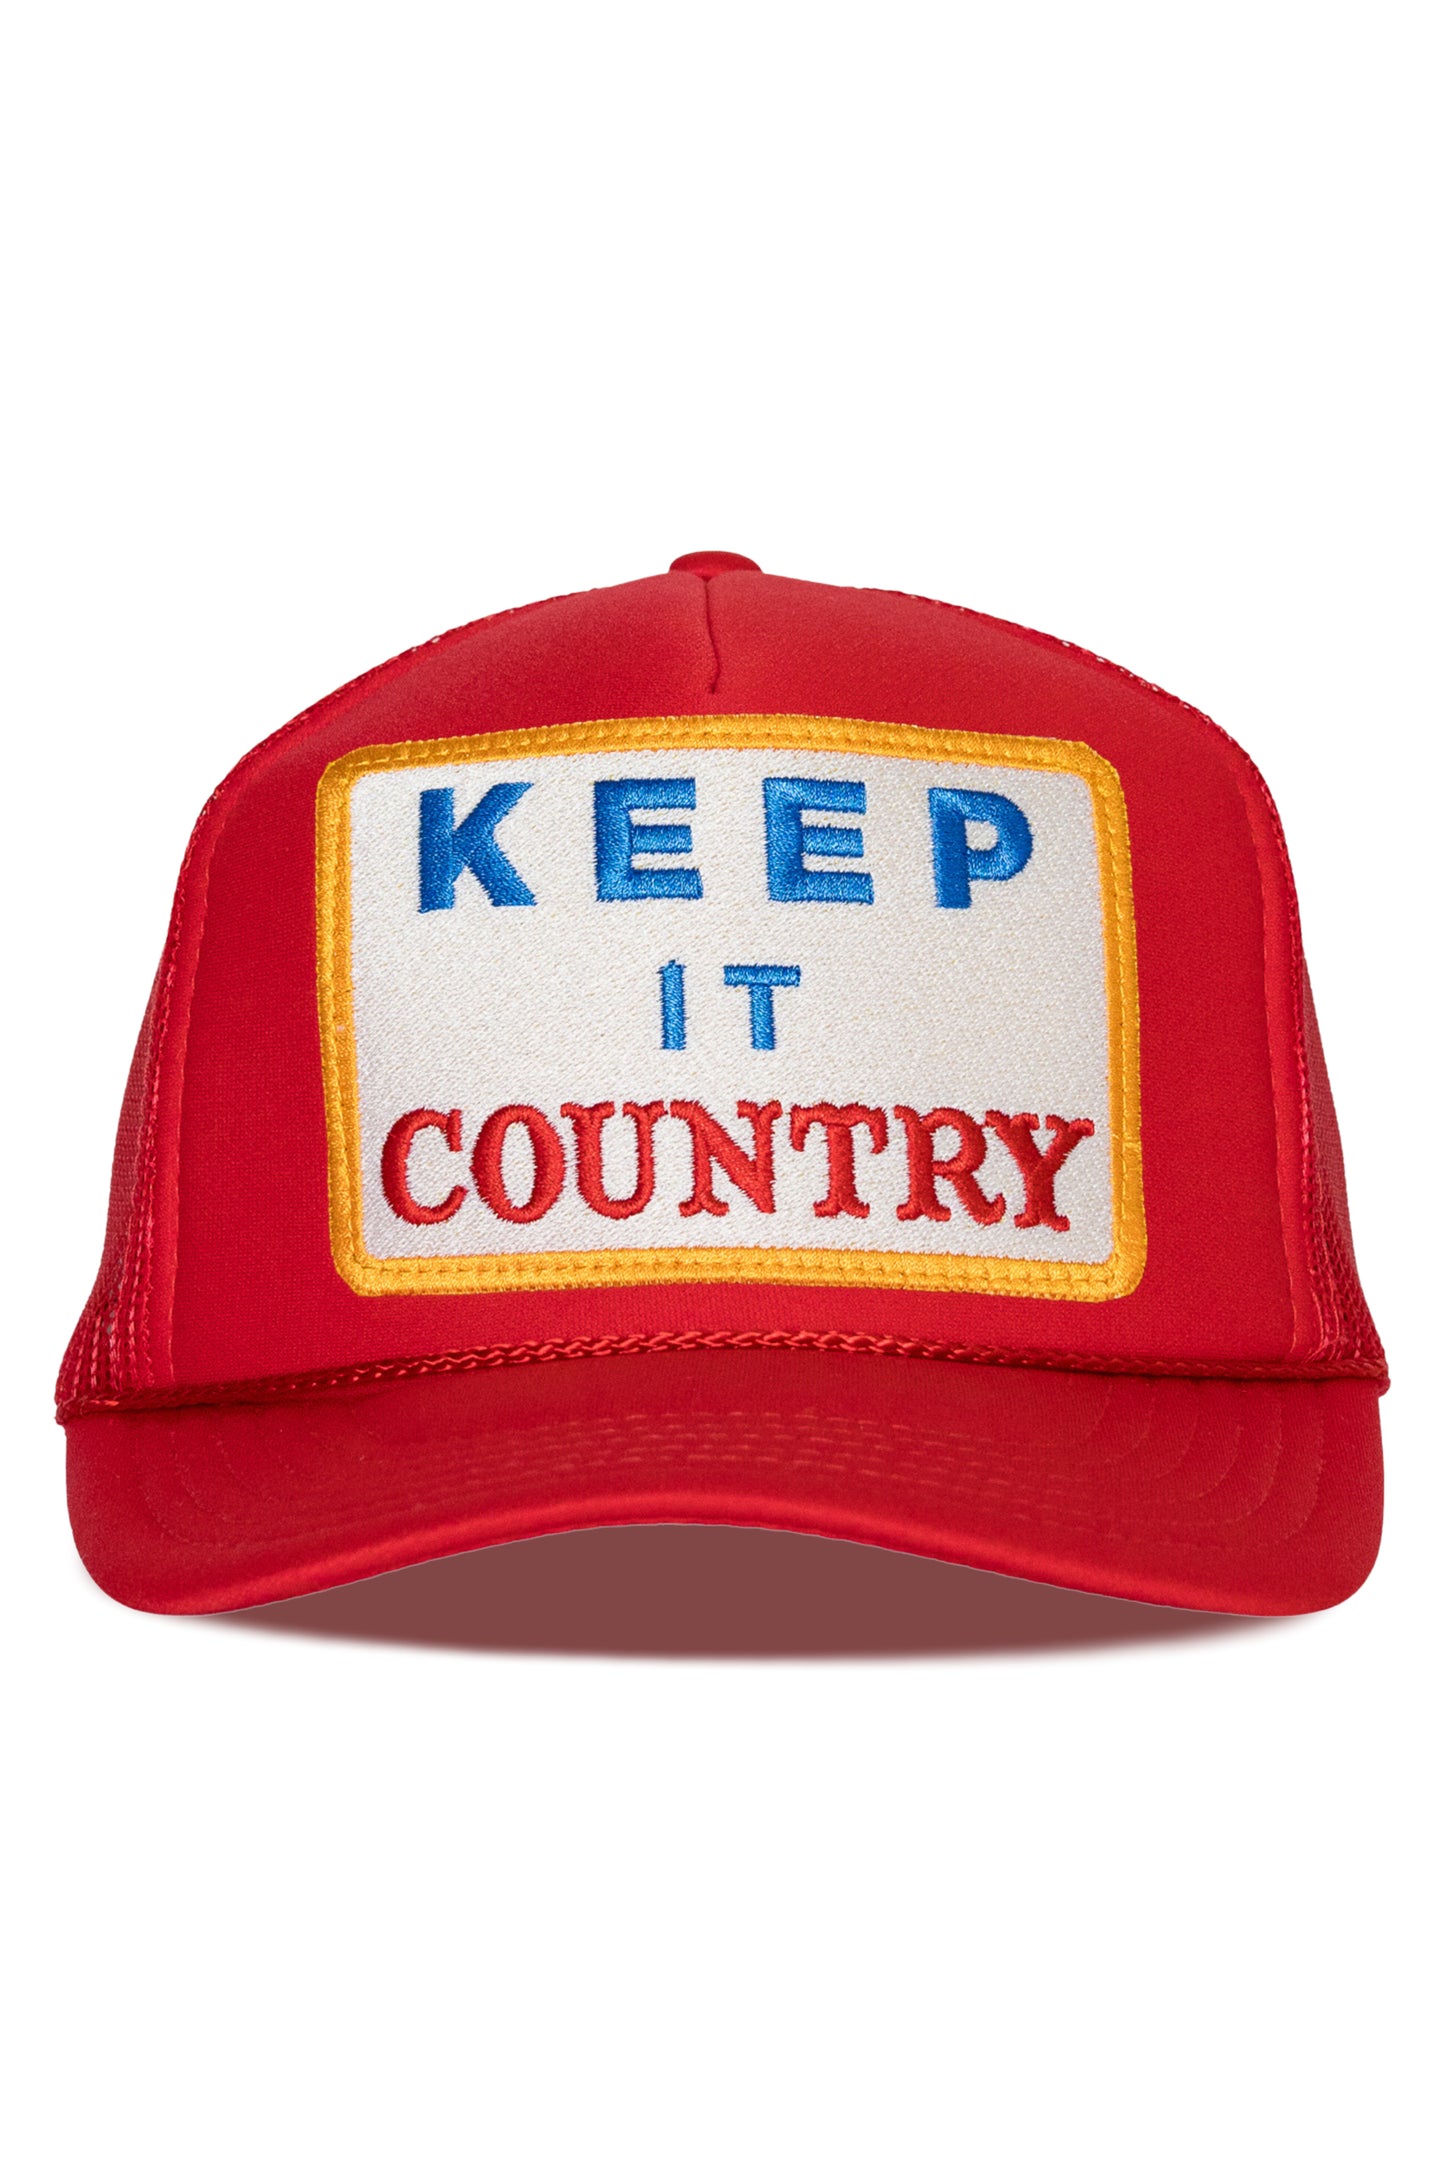 Keep It Country - Red